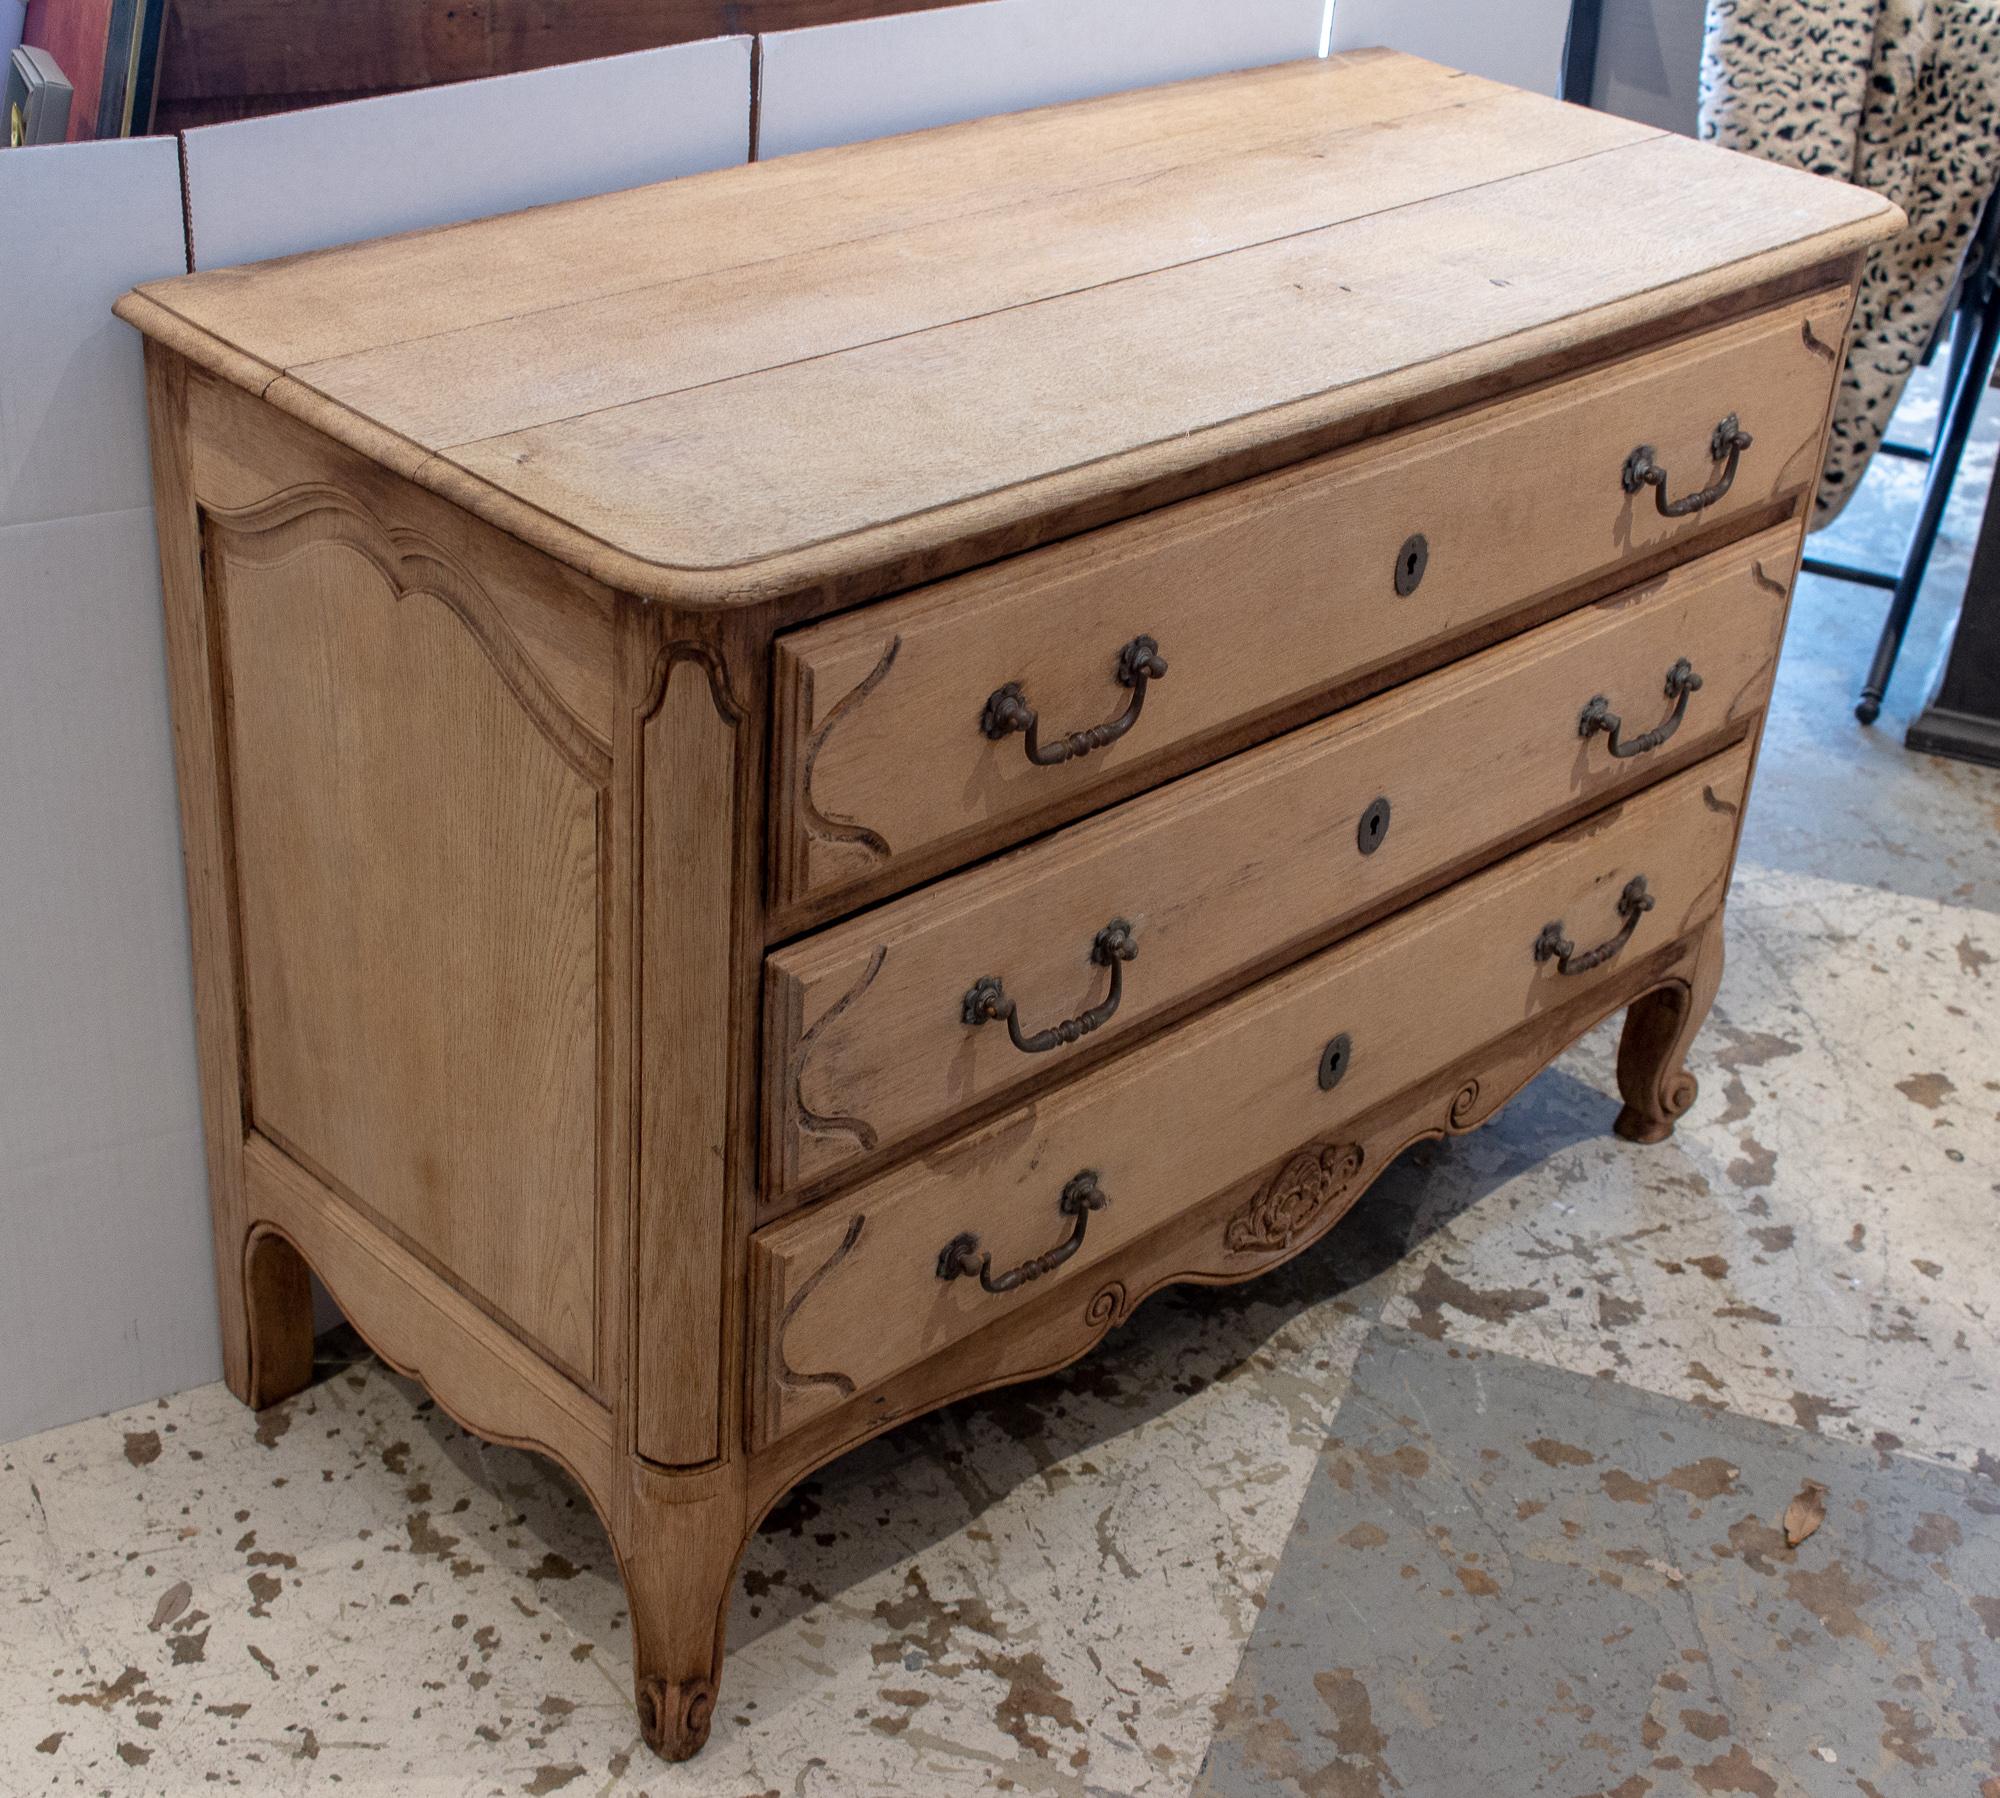 This stripped wood commode dates to the early 20th century, and features wonderful carved details in the edges, legs, drawer fronts and the lower skirt and legs. With three ample drawers, this piece would allow plenty of storage, or could be